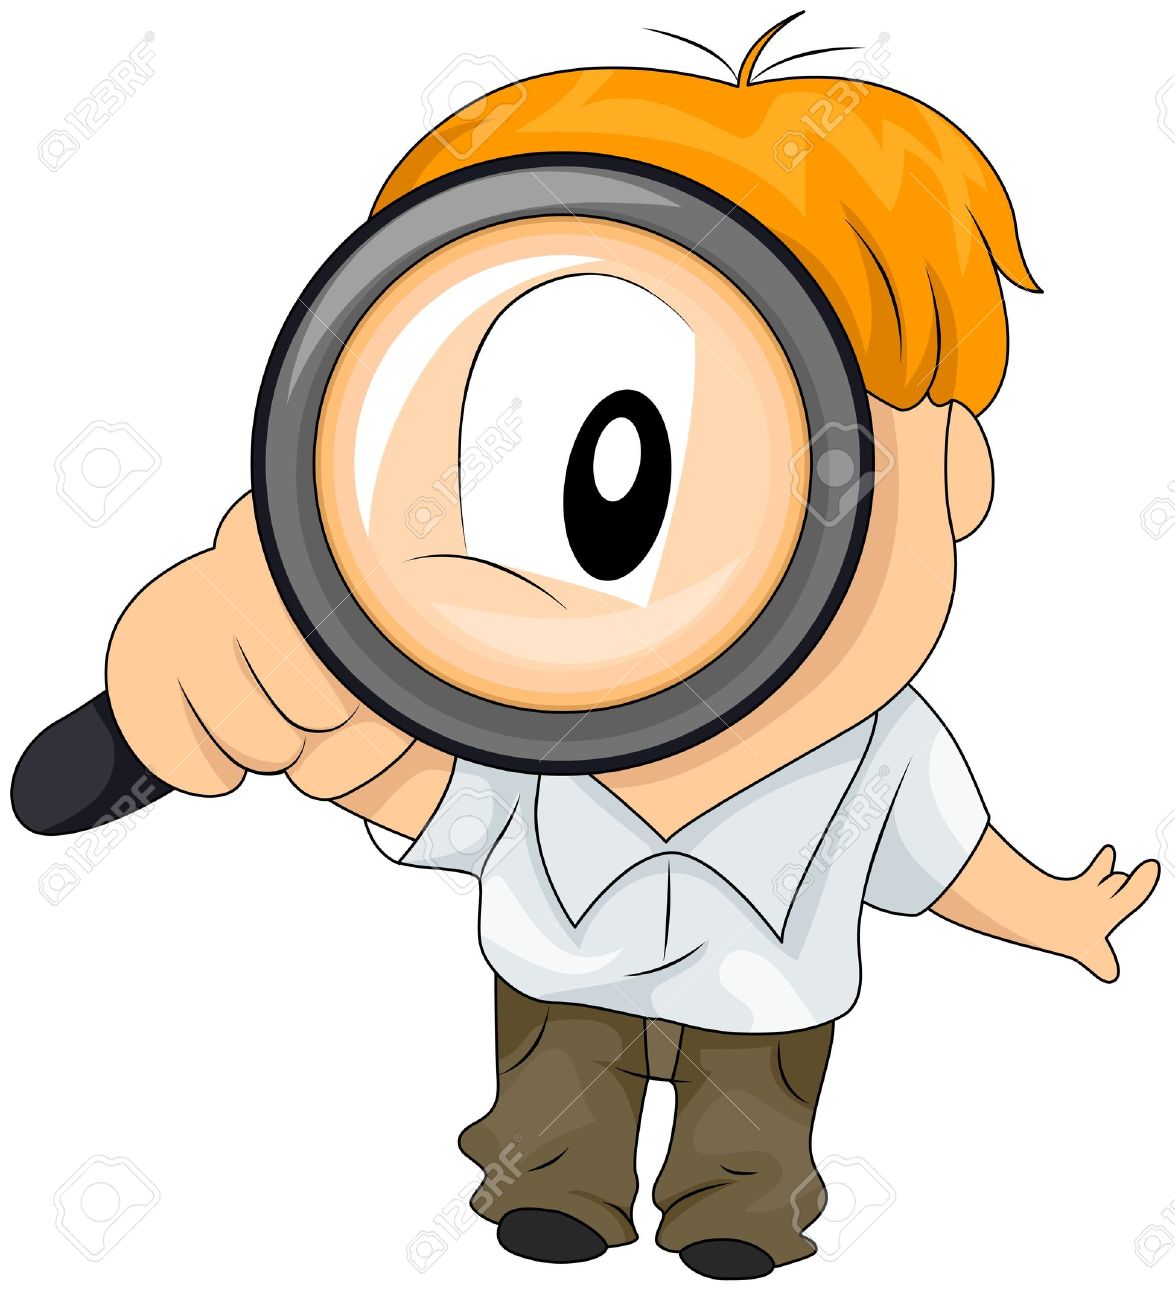 person searching clipart - Clipground